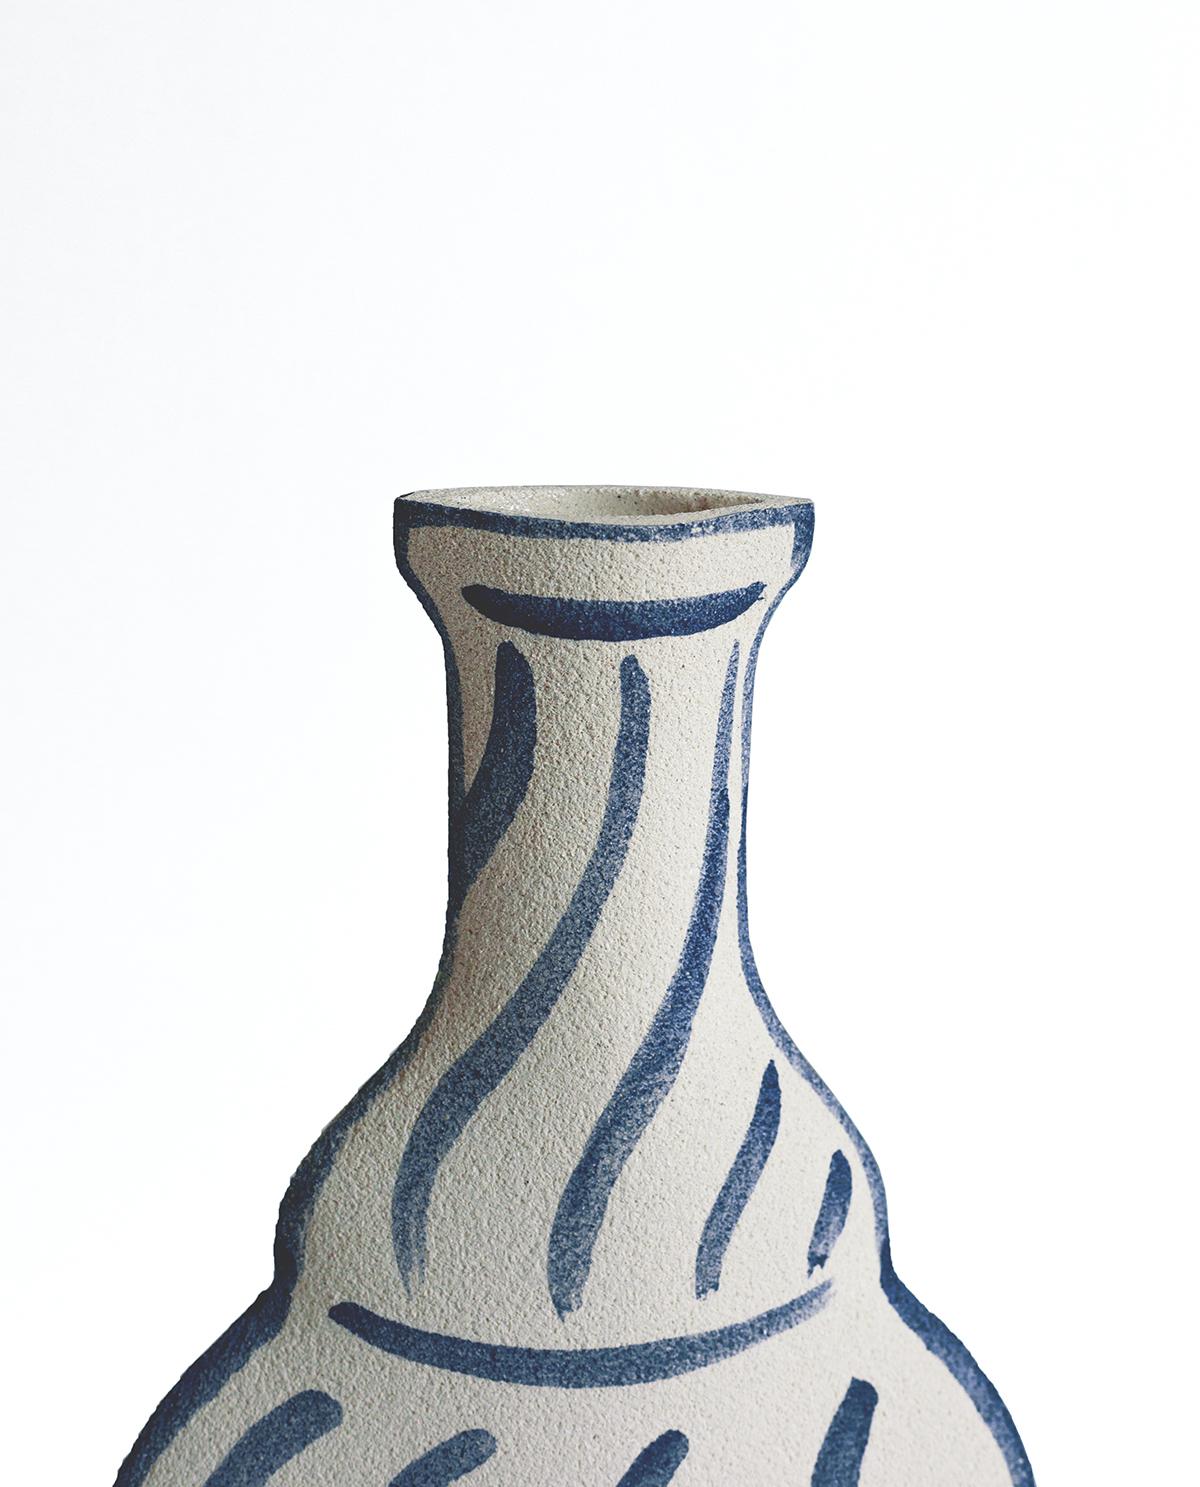 Minimalist 21st Century ‘Morandi Vase - Blue’, in White Ceramic, Hand-Crafted in France For Sale